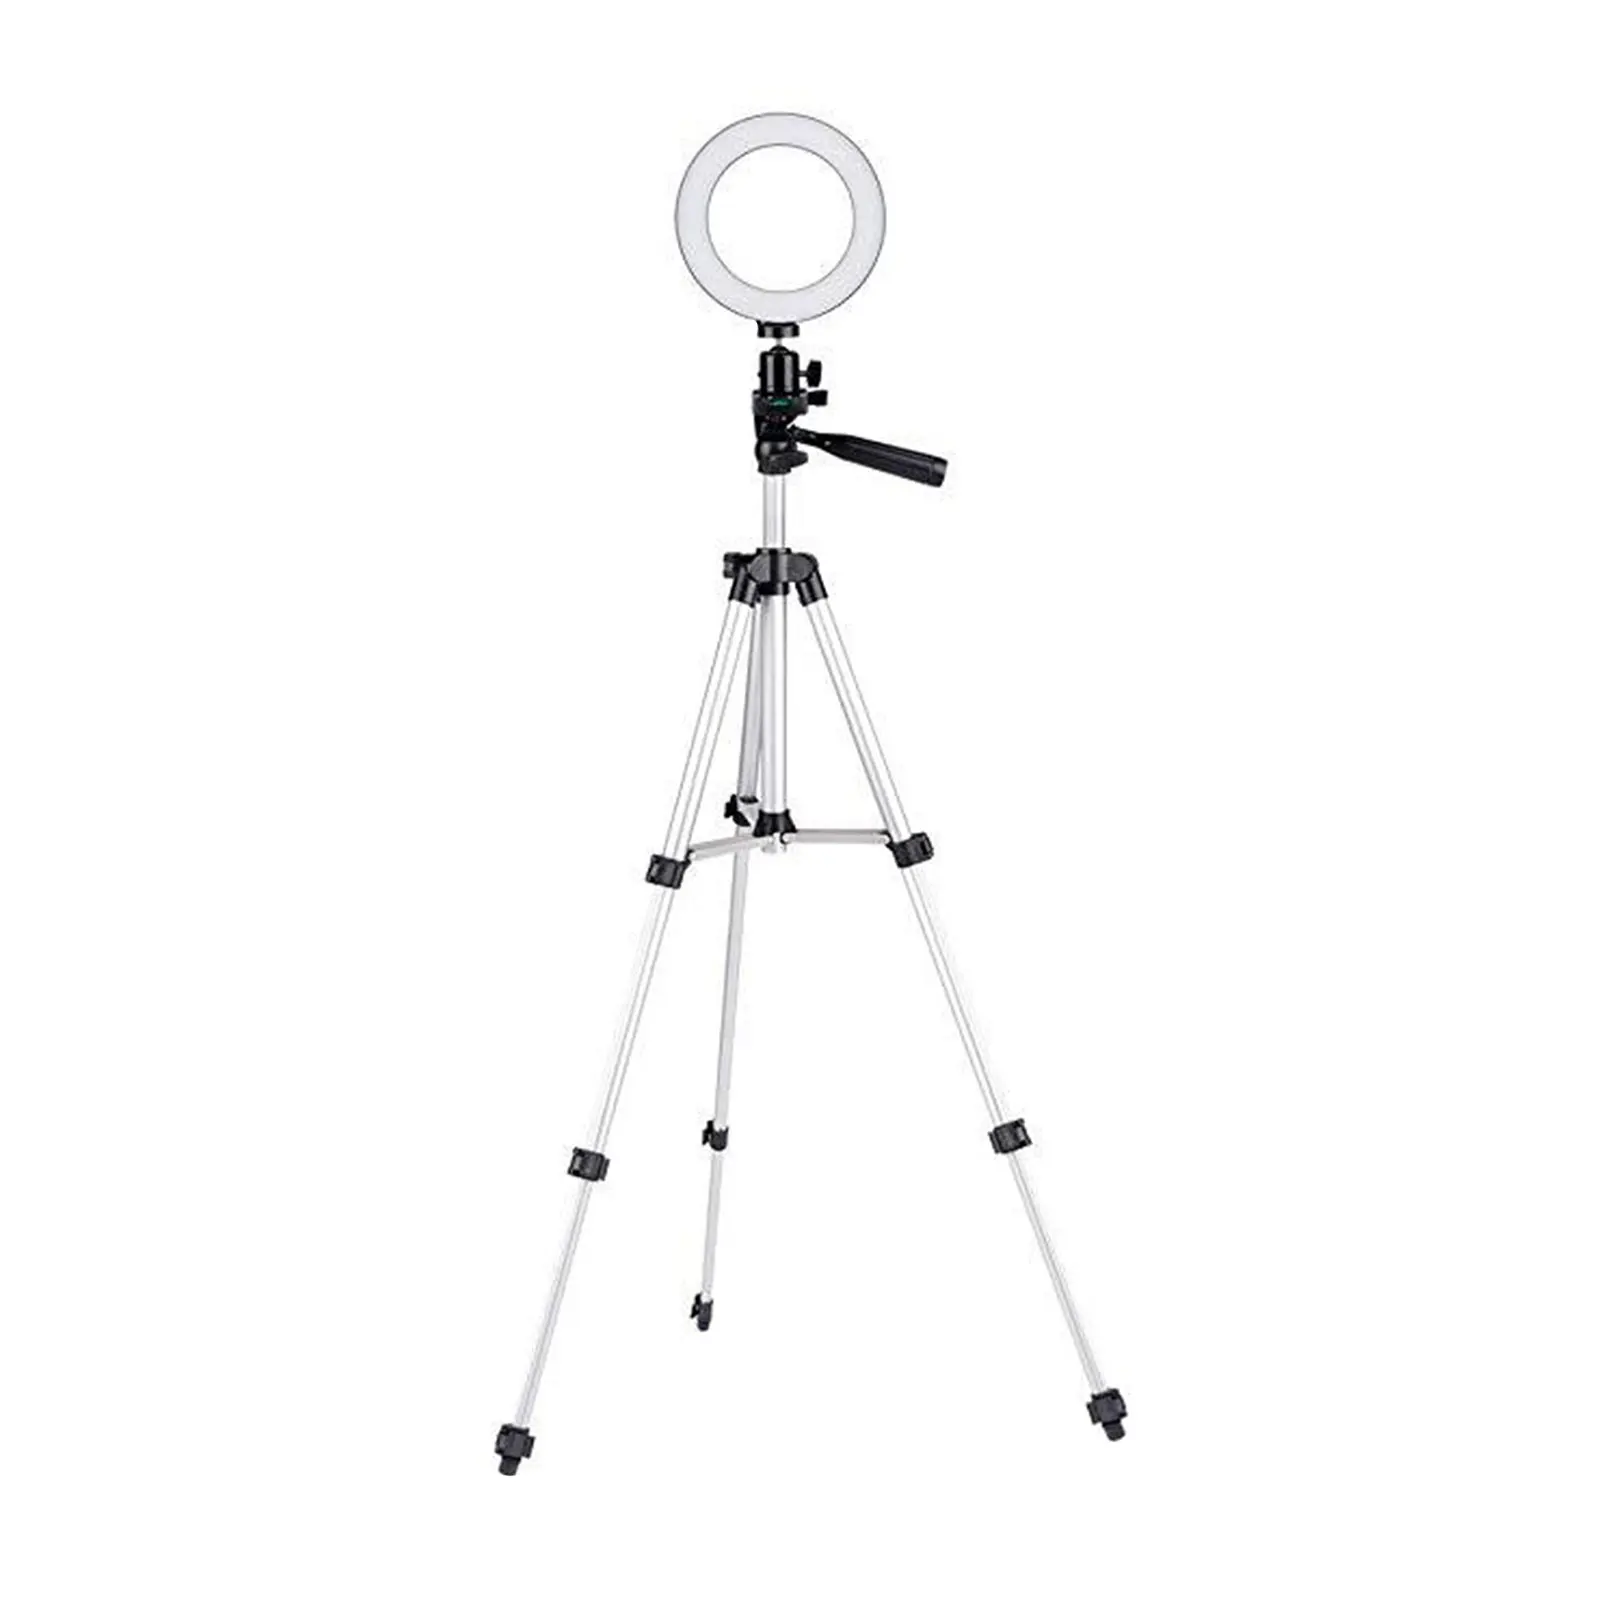 

Selfie Led Ring Light Bicolor Dimmable Lamp Ringlamp With Tripod Stand Overhead Arm Clip For Youtube Live Stream Video Recording